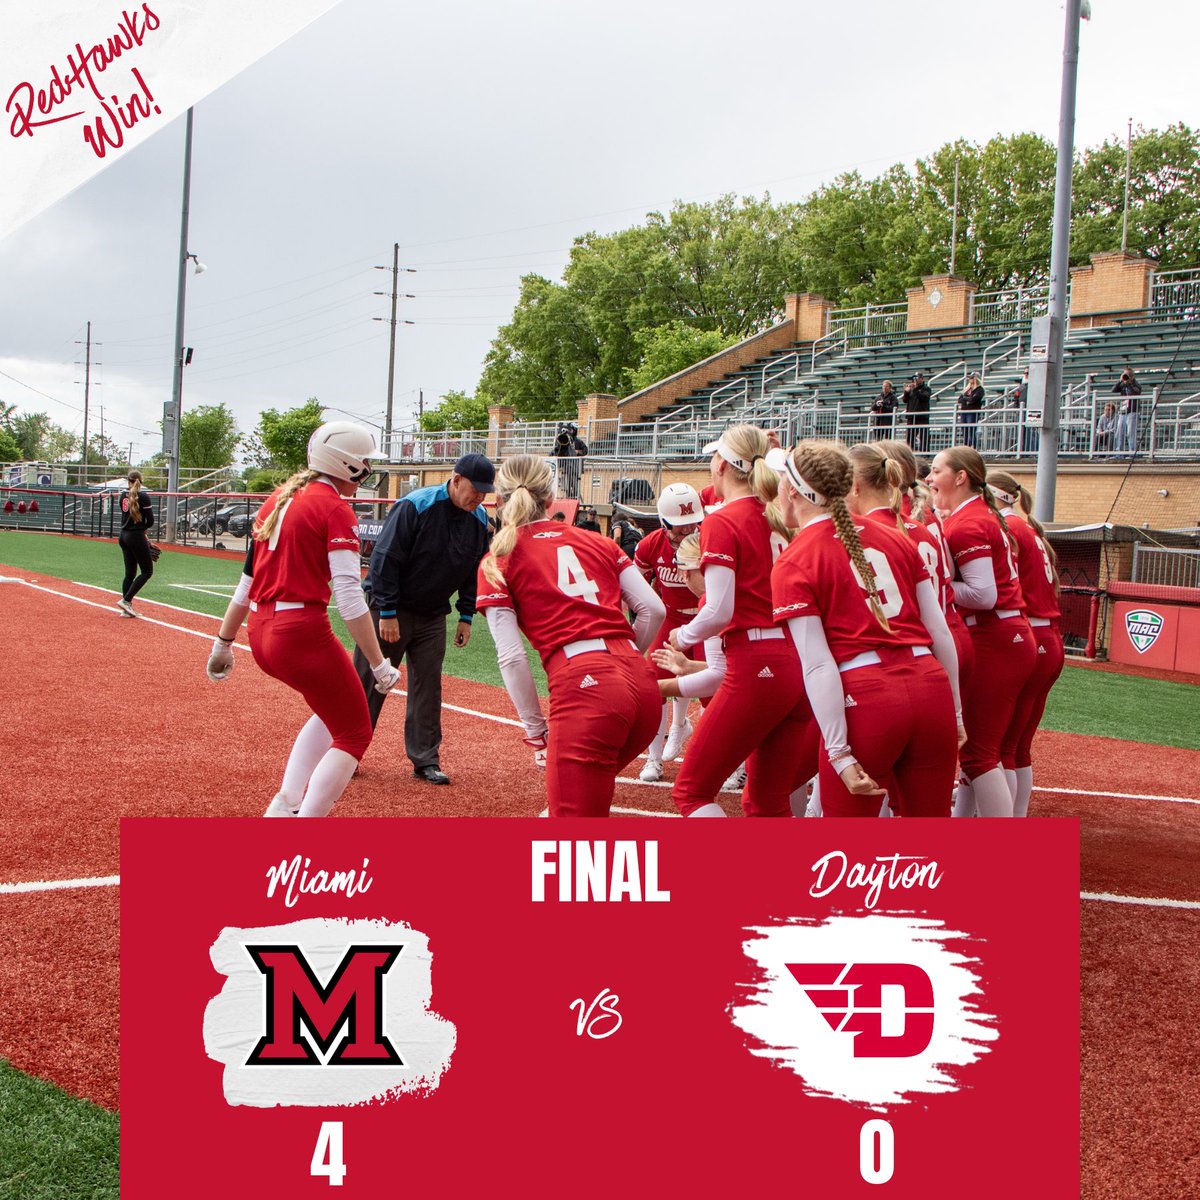 RedHawks Win!! They will be playing again tonight against Virginia! #RedHawks 🔴Addy Jarvis pitched the entire game with 5 strikeouts and no runs. 🔴Hadley Parisien hit a home run and had 2 RBIs. 🔴Parisien and Parks went 1 - 2 at the plate.